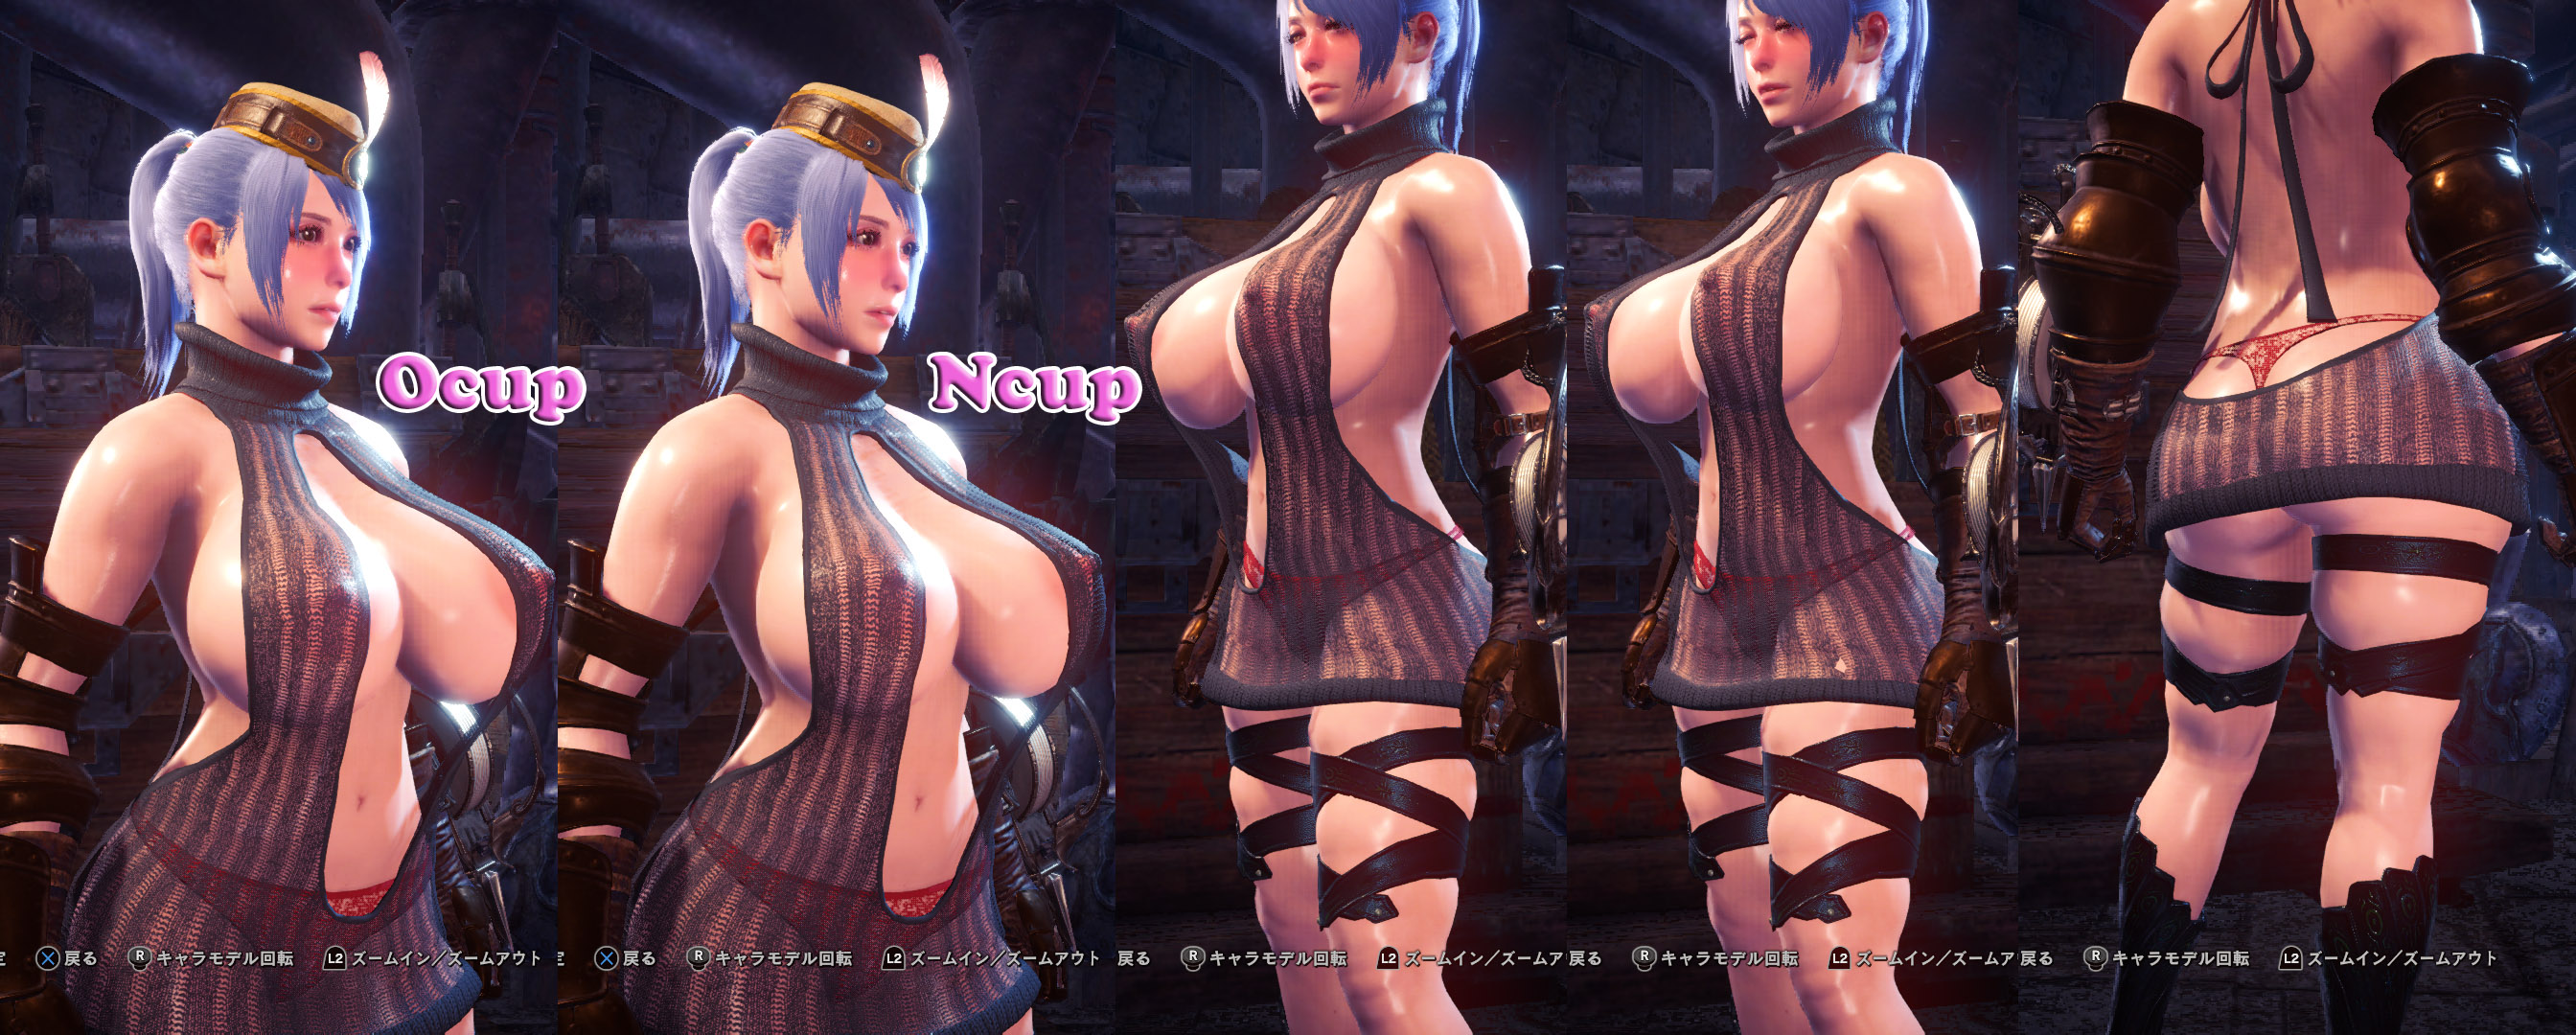 Monster Hunter World Nude Mod Implements Oily & Bouncy Bare Breasts.